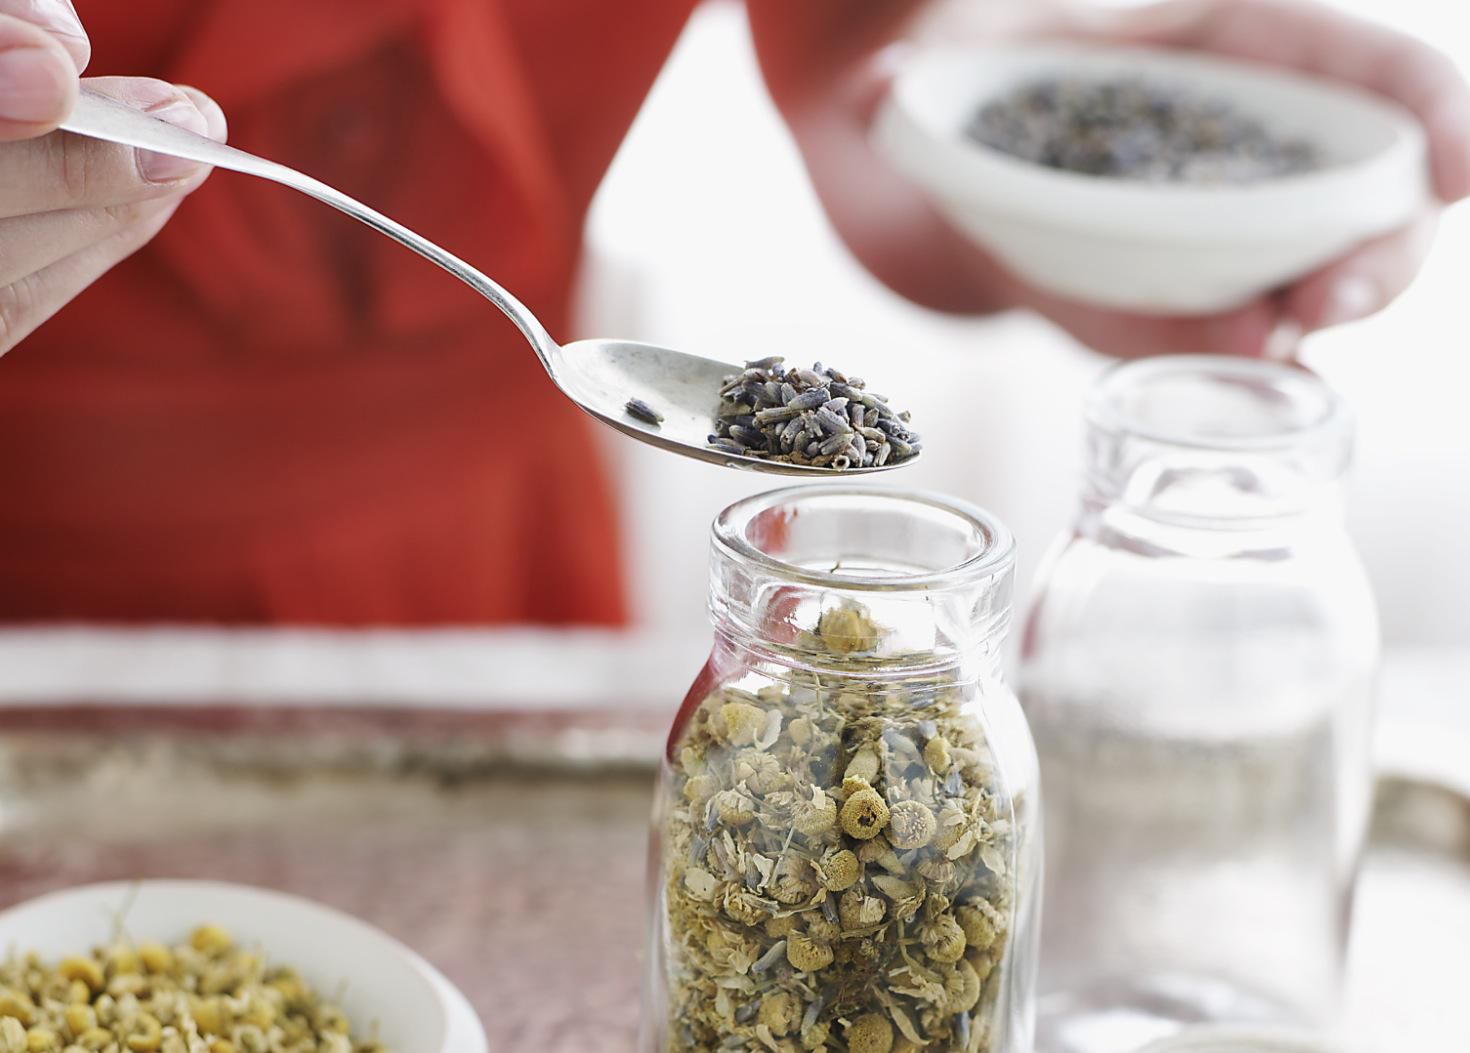 How To Make Your Own Herb Tea Blends